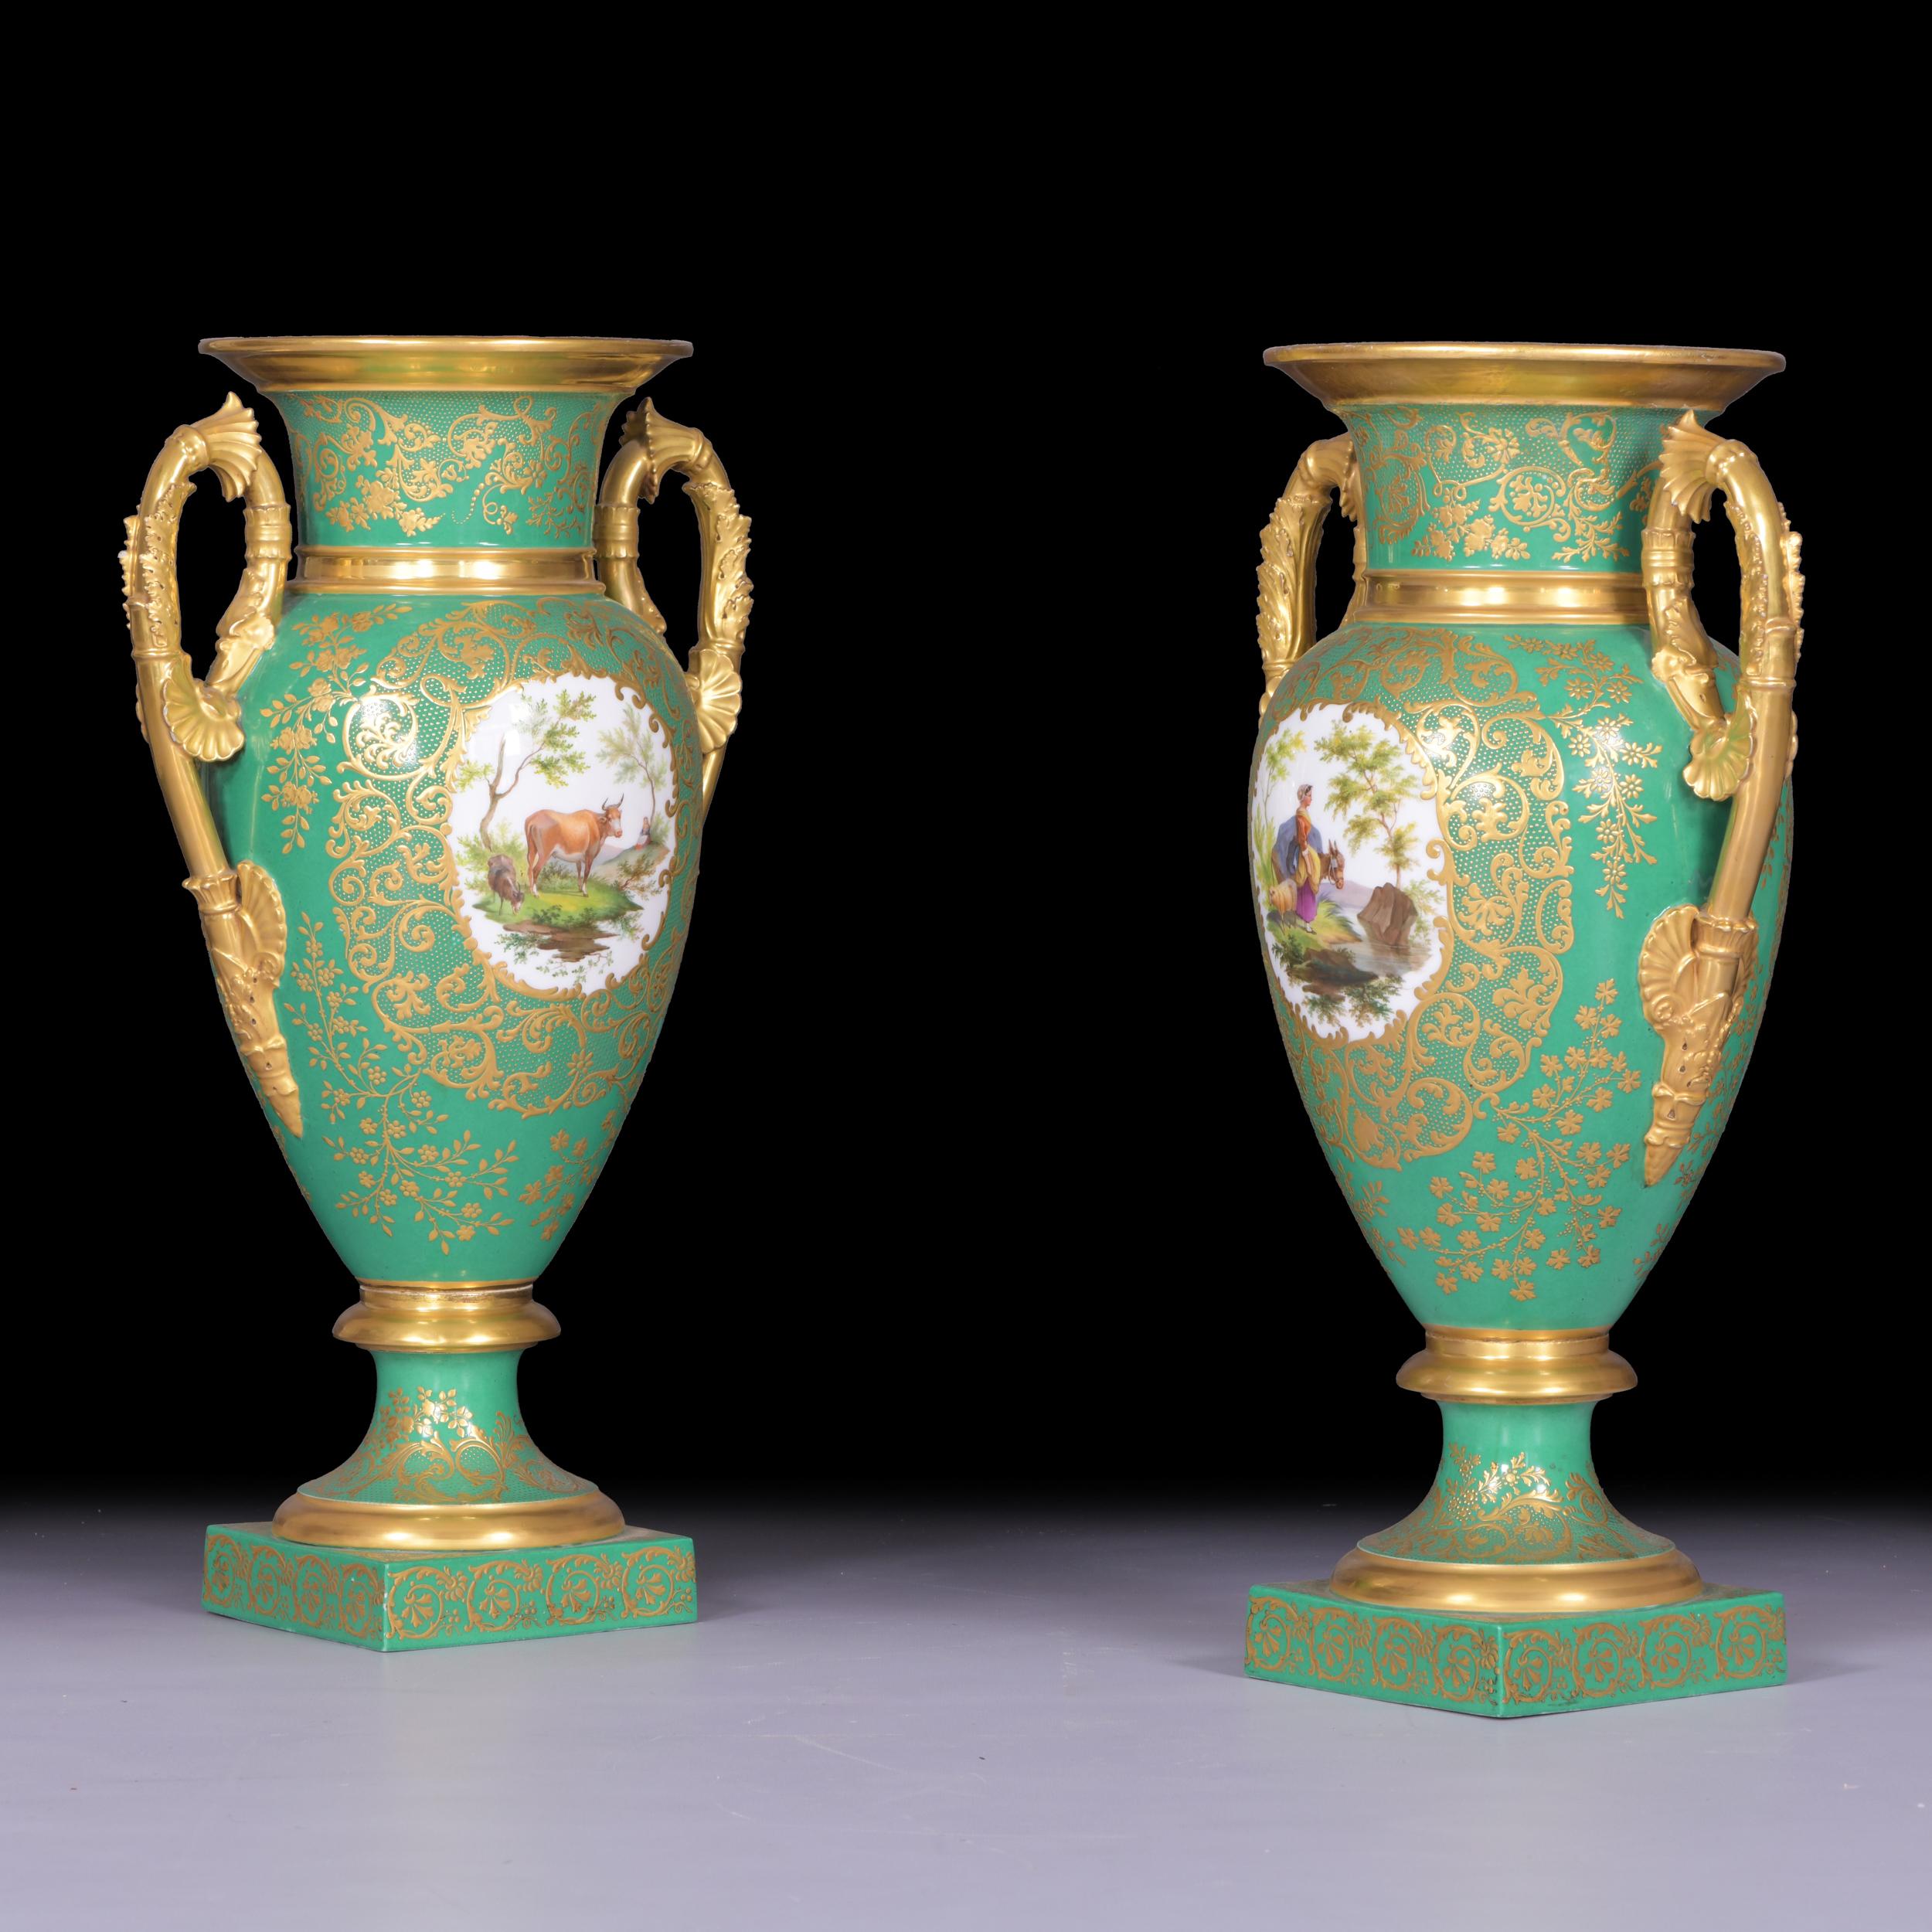 A fine pair of antique porcelain vases, dating from the early 19th century in the Empire period, set on a square base and spreading socle, the front of the body of the vase is painted with a idealised scene. The idyllic pastoral scene shows a noble